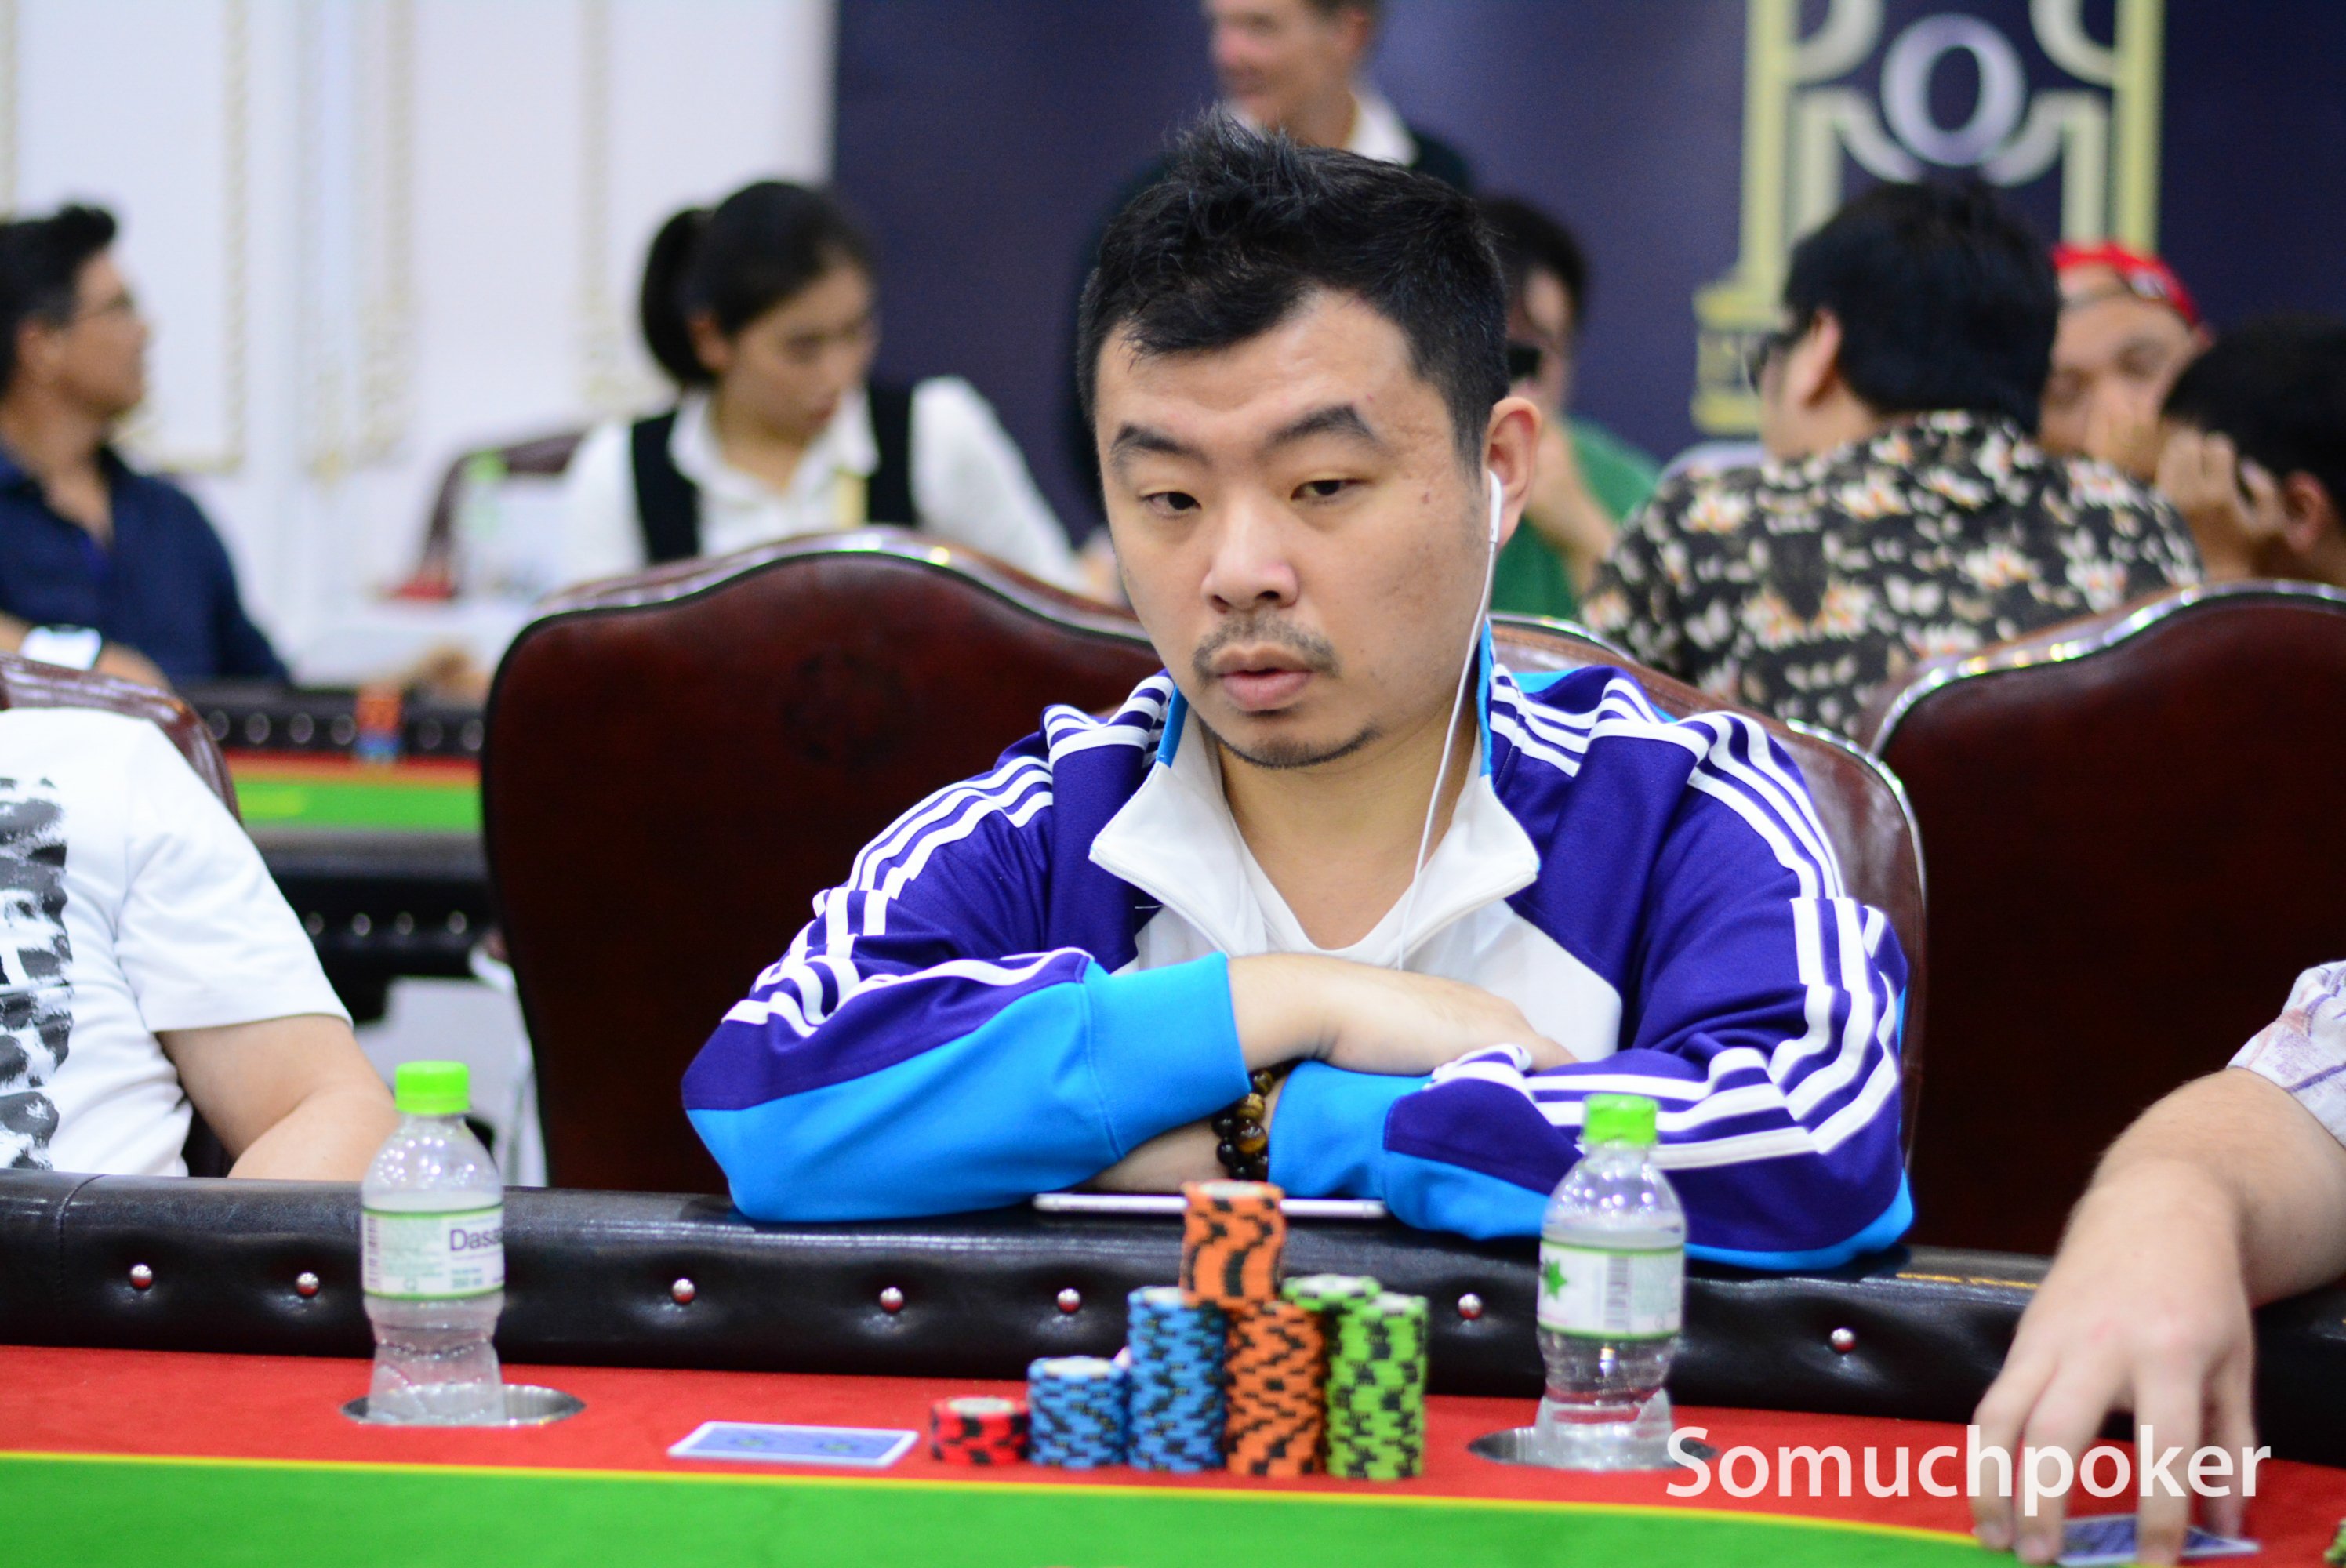 Edward Chun Ho Yam breaks world record of most cashes in a year